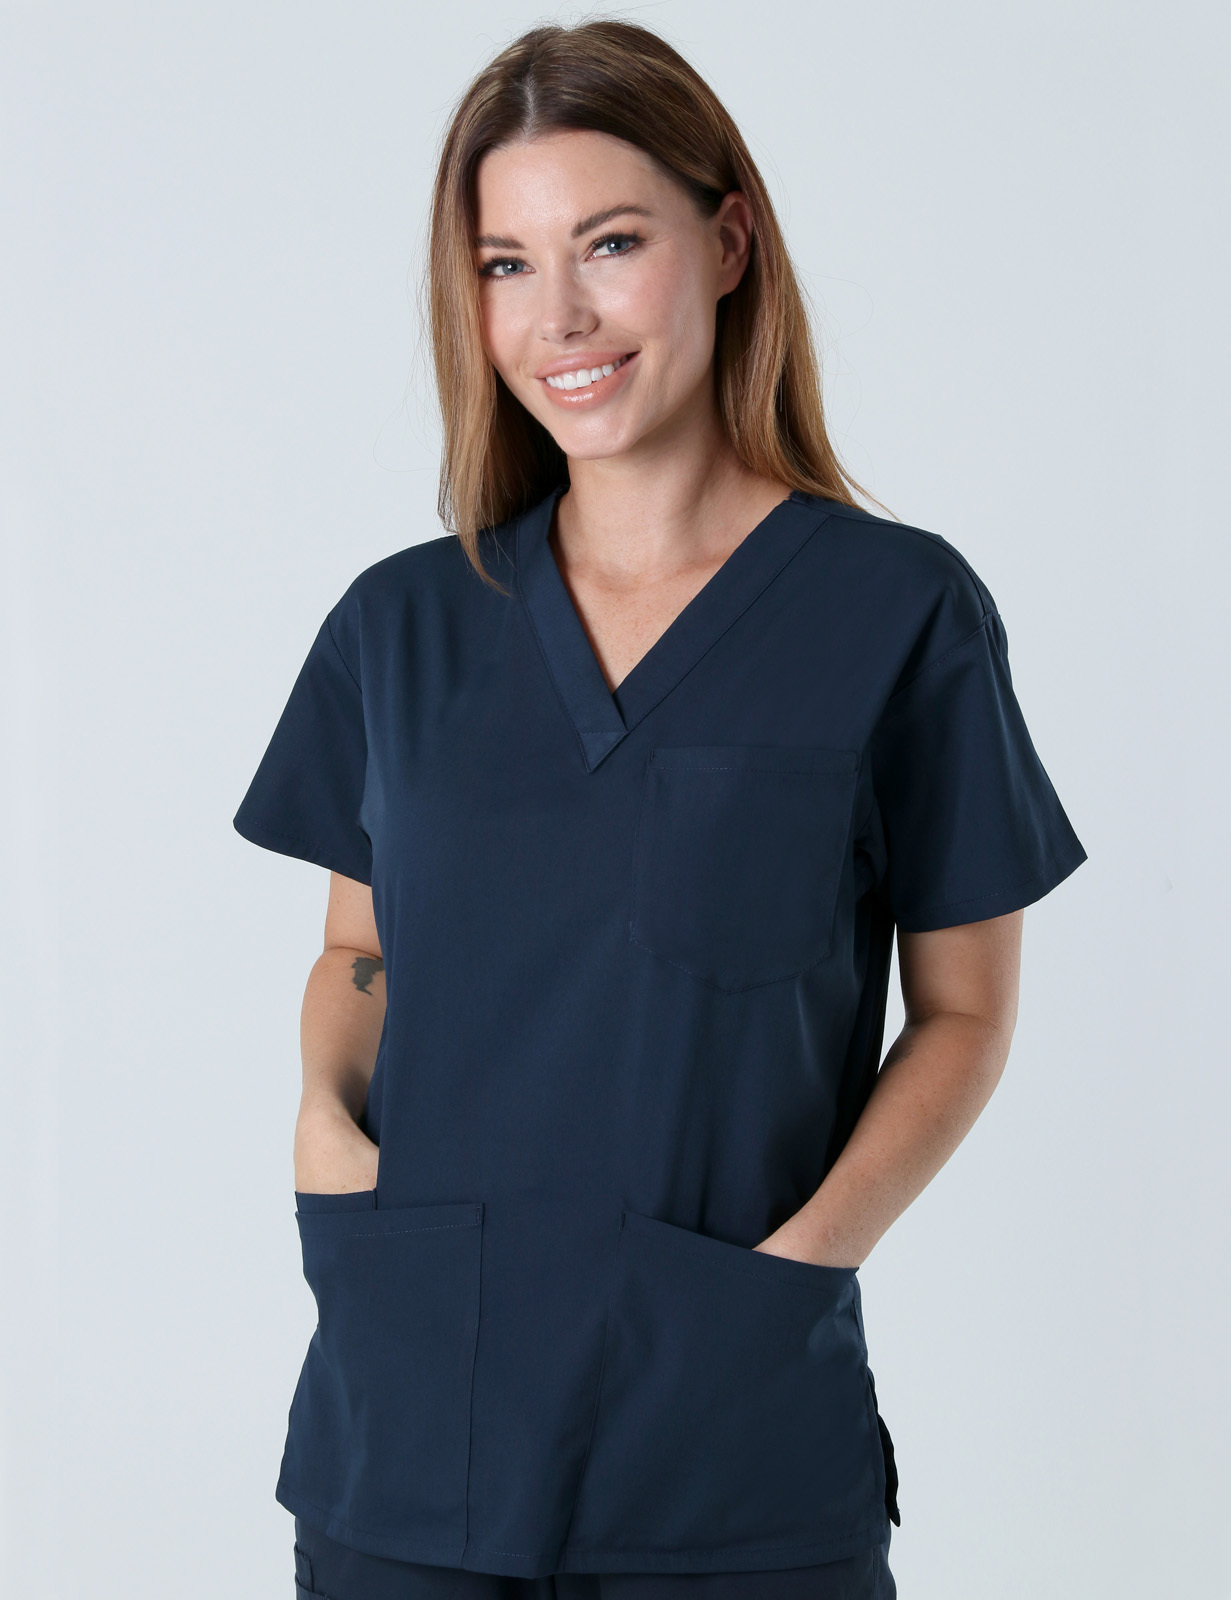 Nambour Hospital - Registered Nurse (4 Pocket Scrub Top and Cargo Pants in Navy incl Logos)